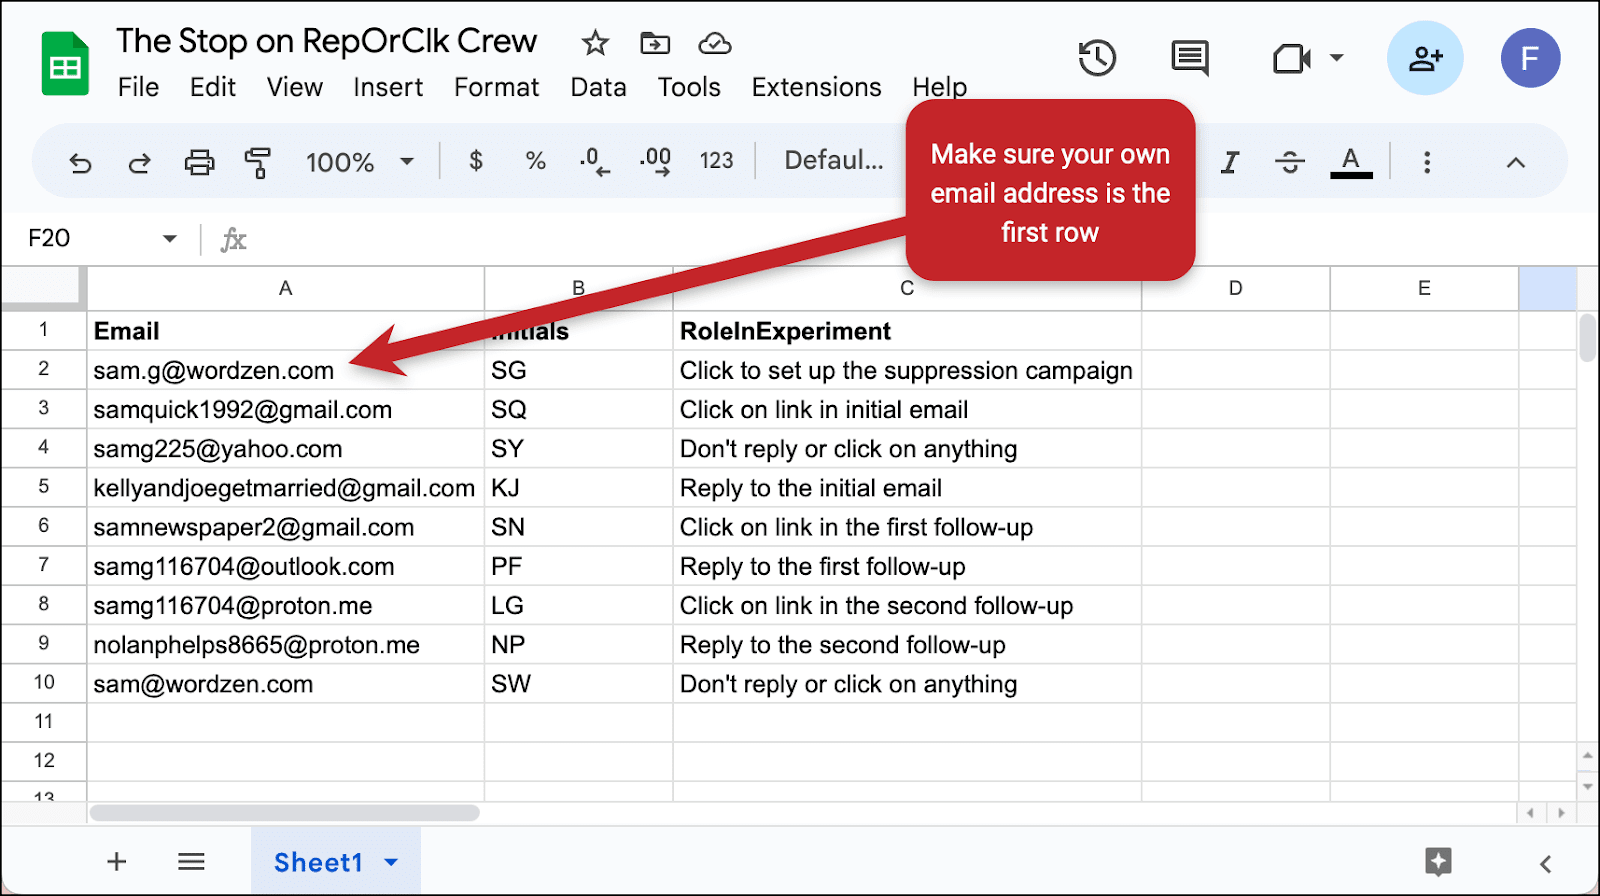 Your campaign Google Sheet with your address first